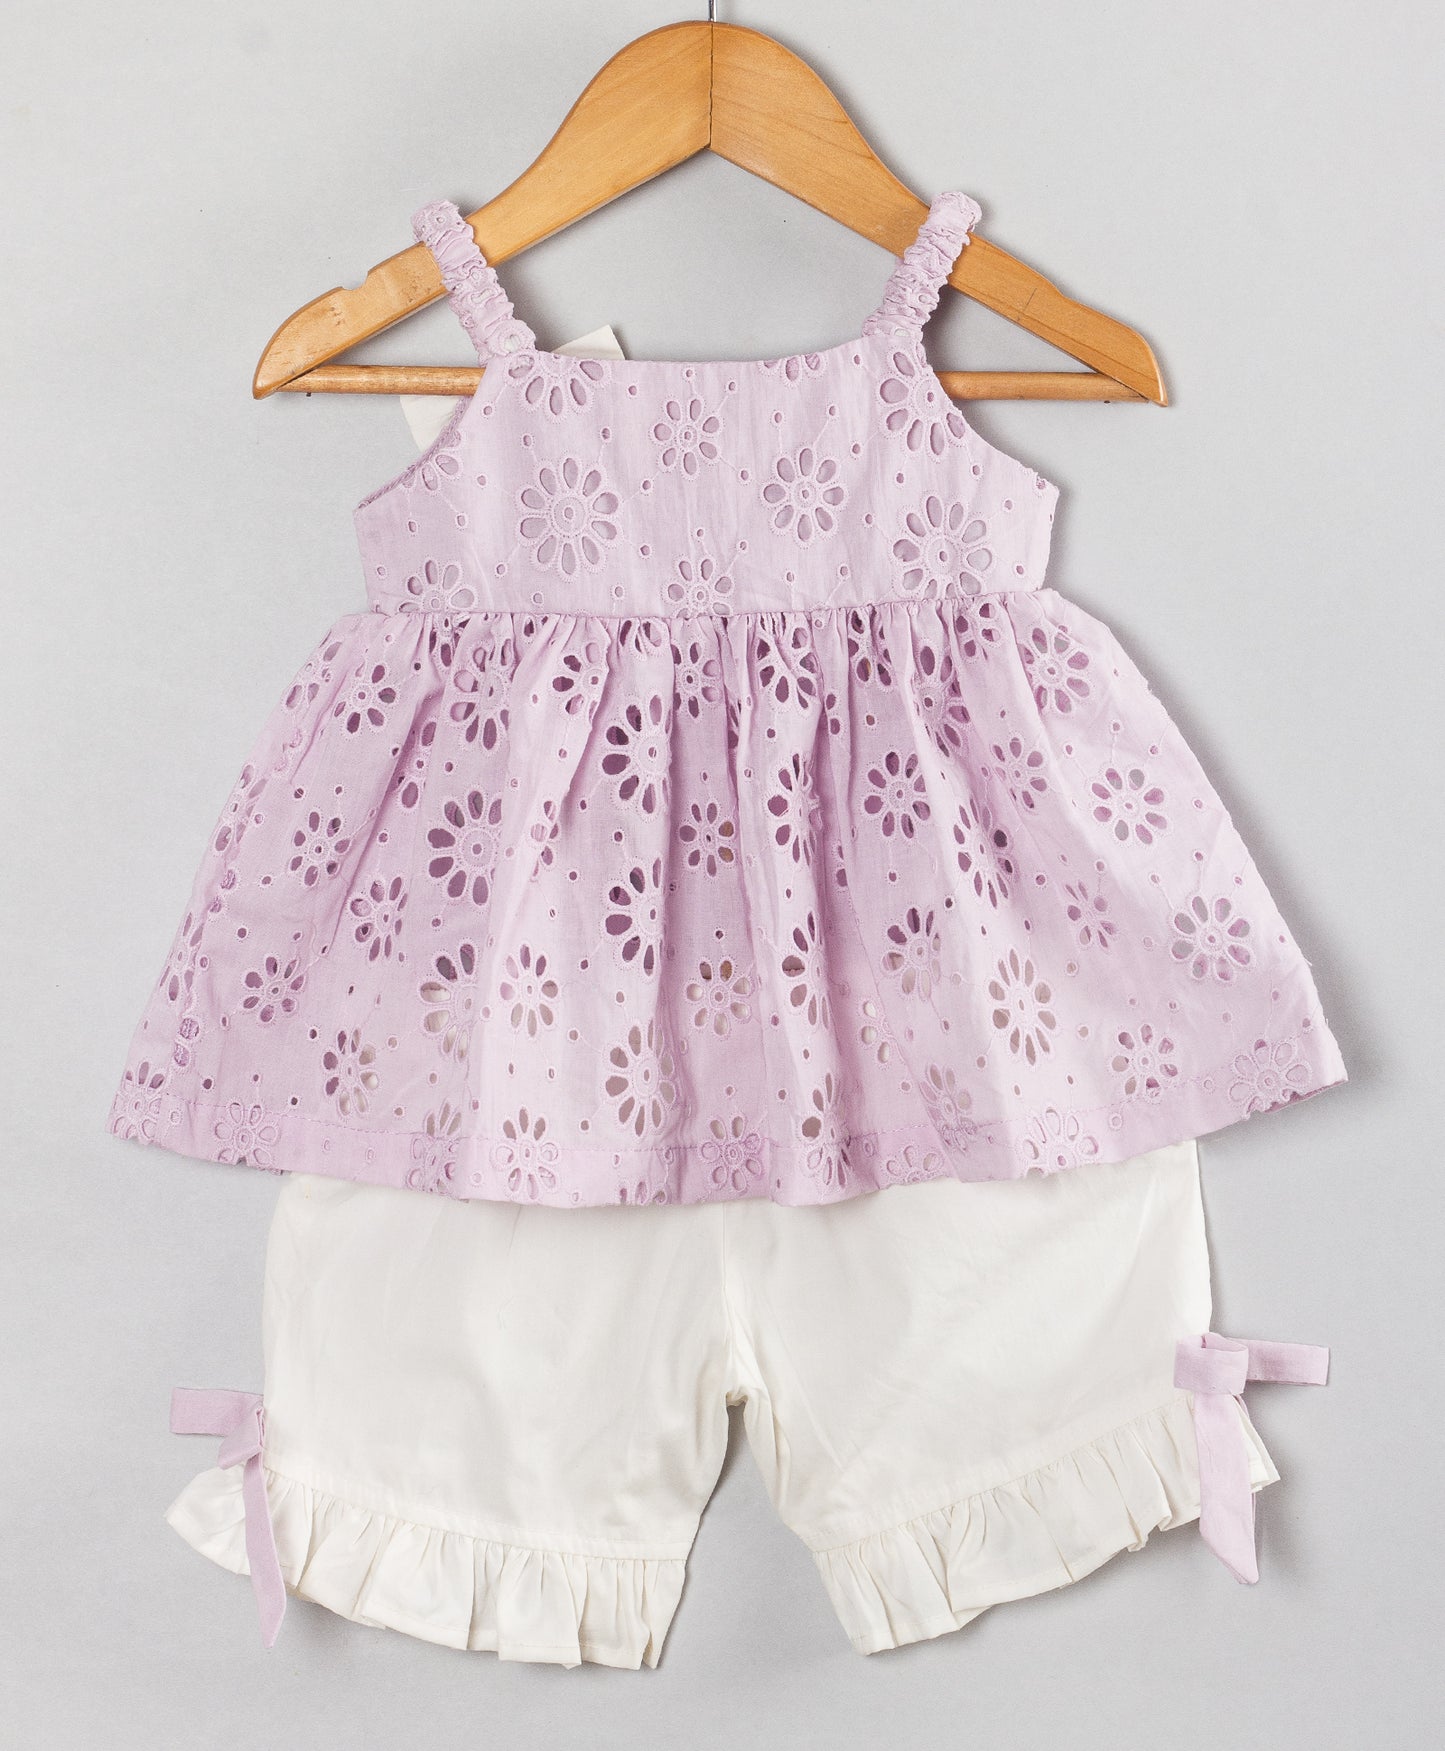 LILAC SCHIFFLI INFANT SET WITH WHITE BLOOMERS